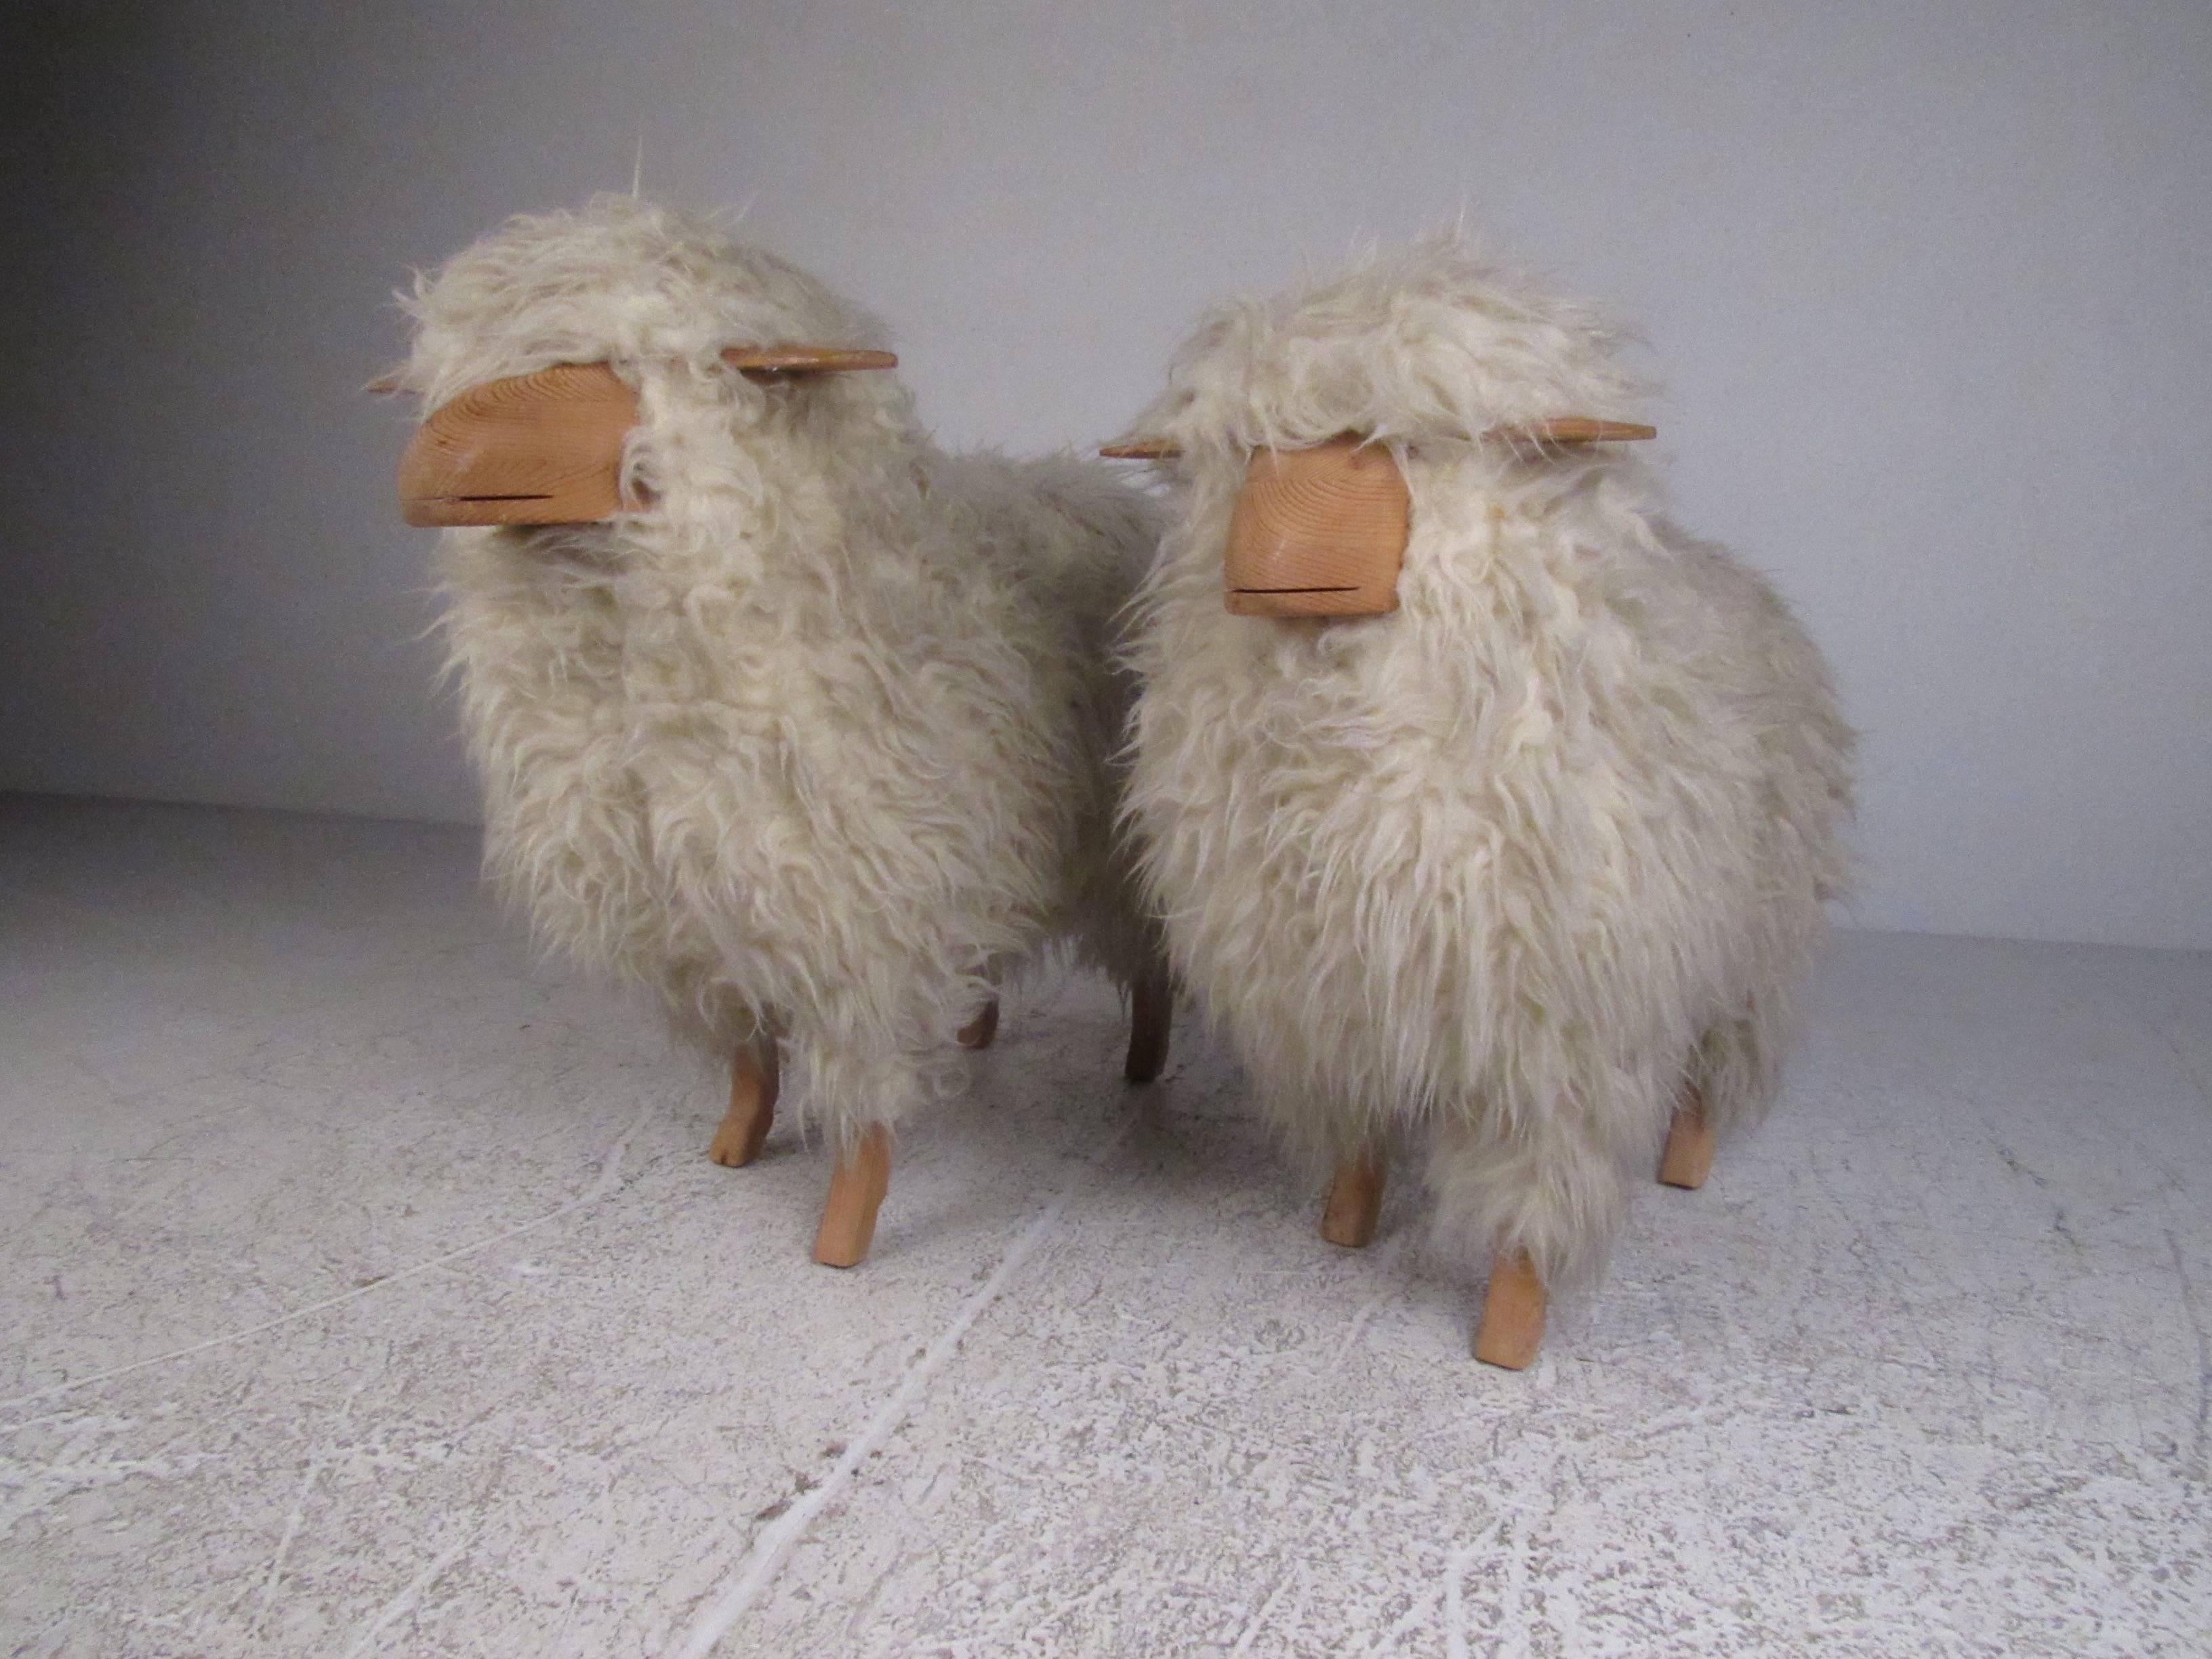 This pair of matched pinewood sheep feature sheepskin covering and sculpted details. Unique pair ideal for home or shop display or use as occasional stools. Please confirm item location (NY or NJ).

Varied dimensions:

16 W x 38 D x 31 H 
14 W x 34